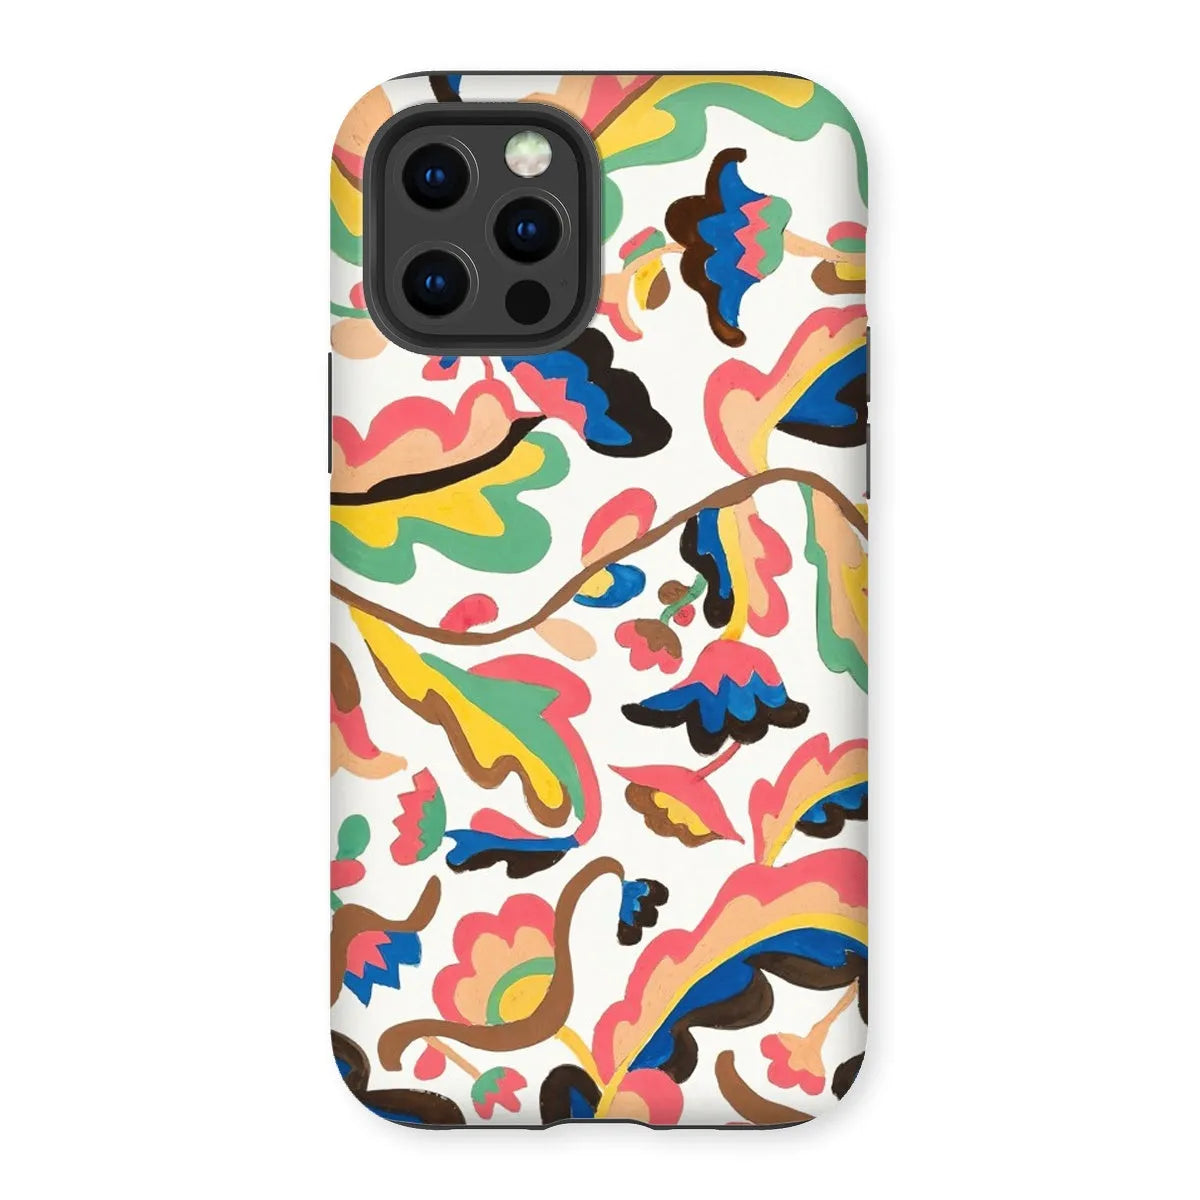 Colcha Floral Aesthetic Pattern Phone Case - Etna Wiswall - Iphone 12 Pro / Matte - Mobile Phone Cases - Aesthetic Art